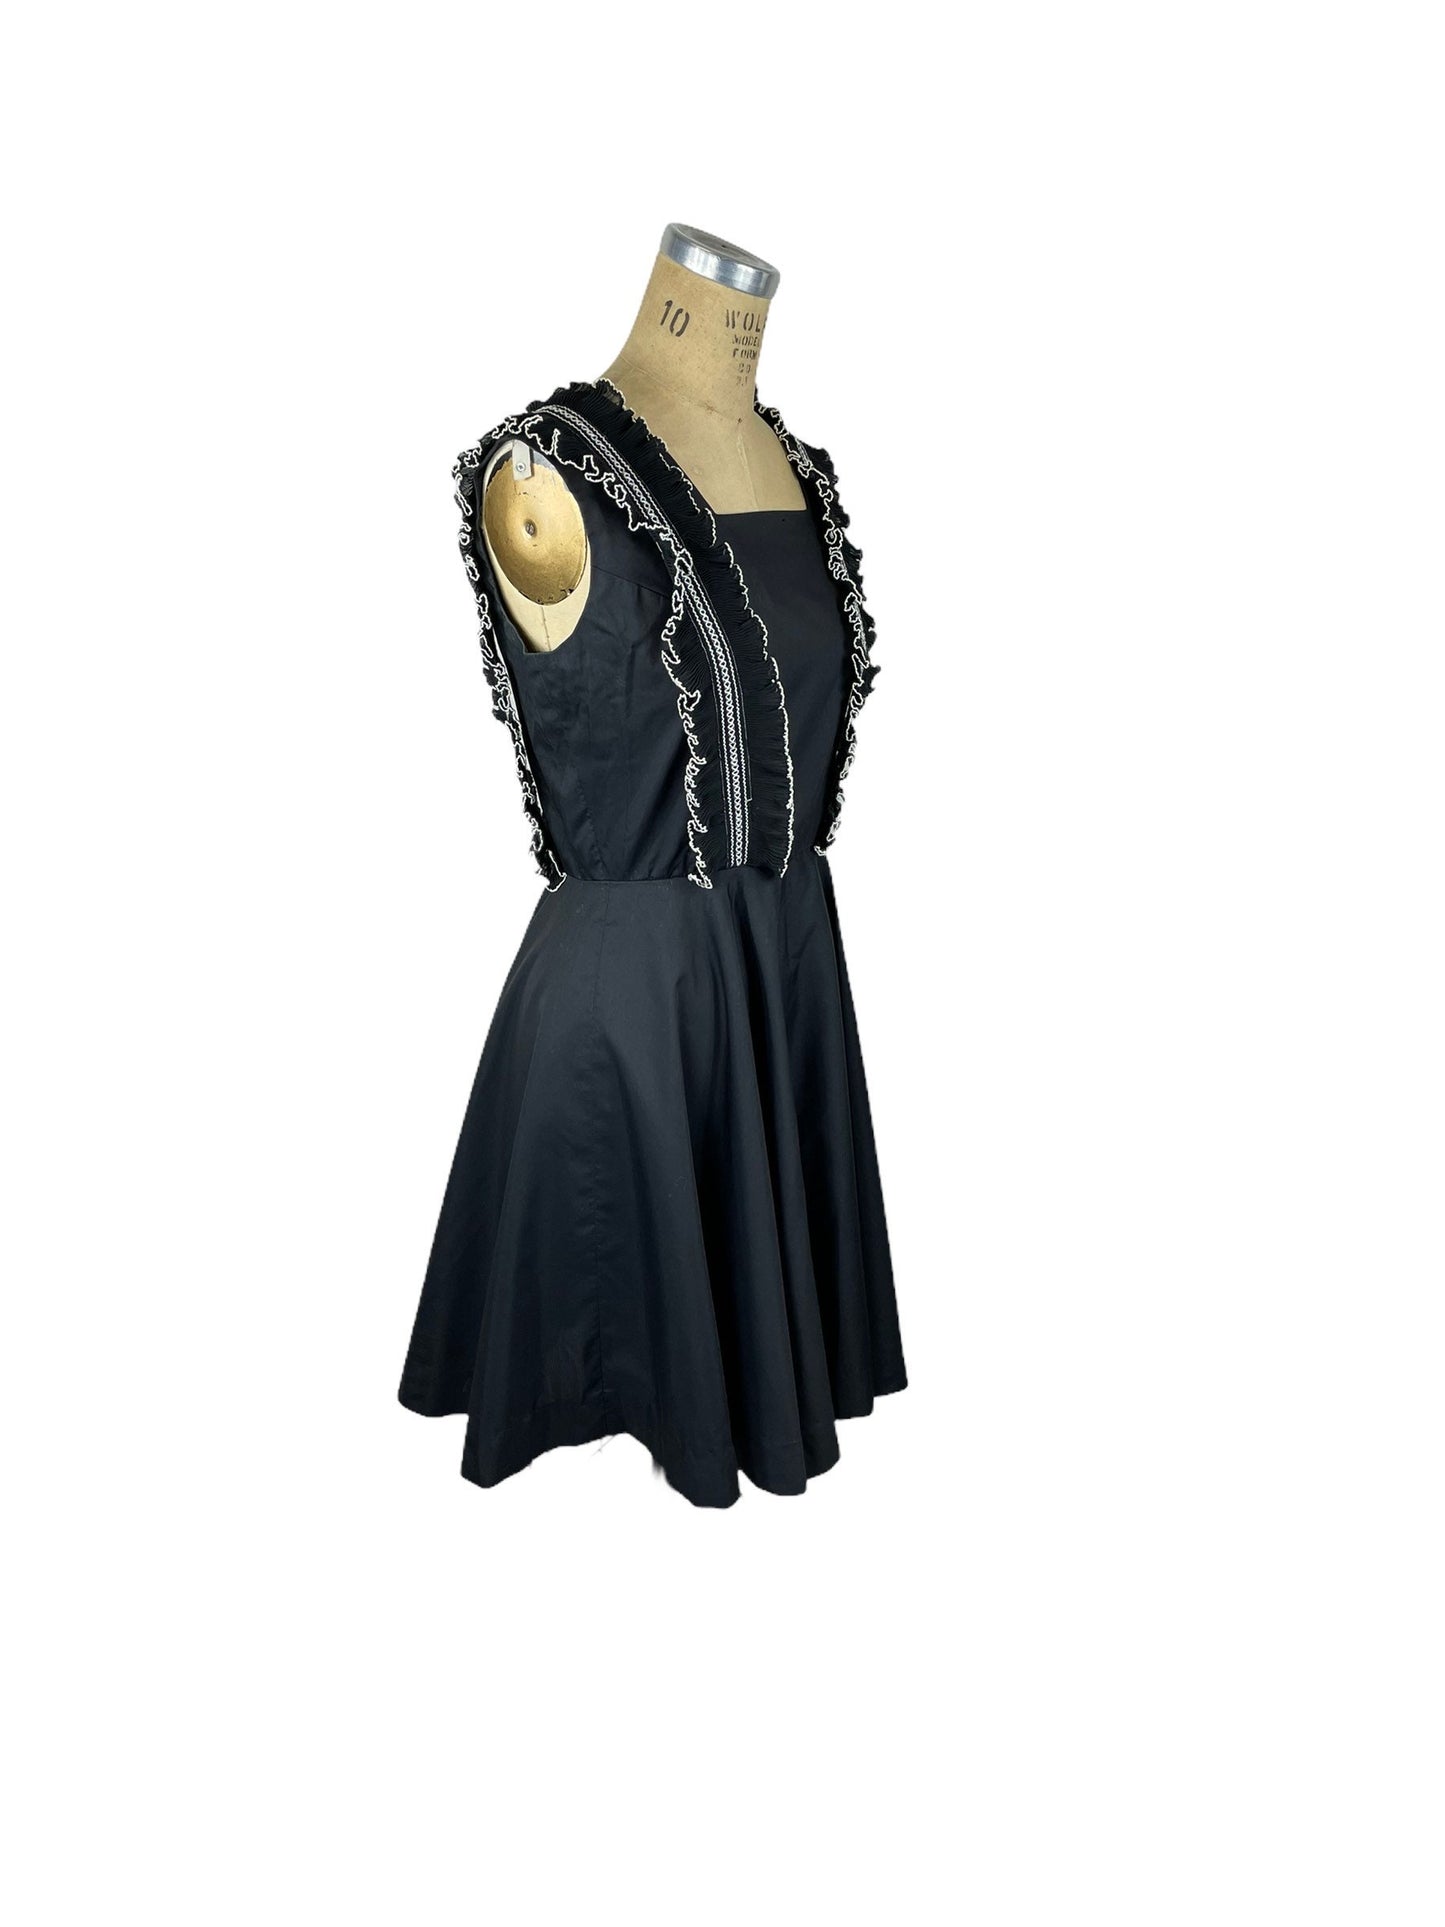 Vintage black square dance dress with ruffled bodice Size M